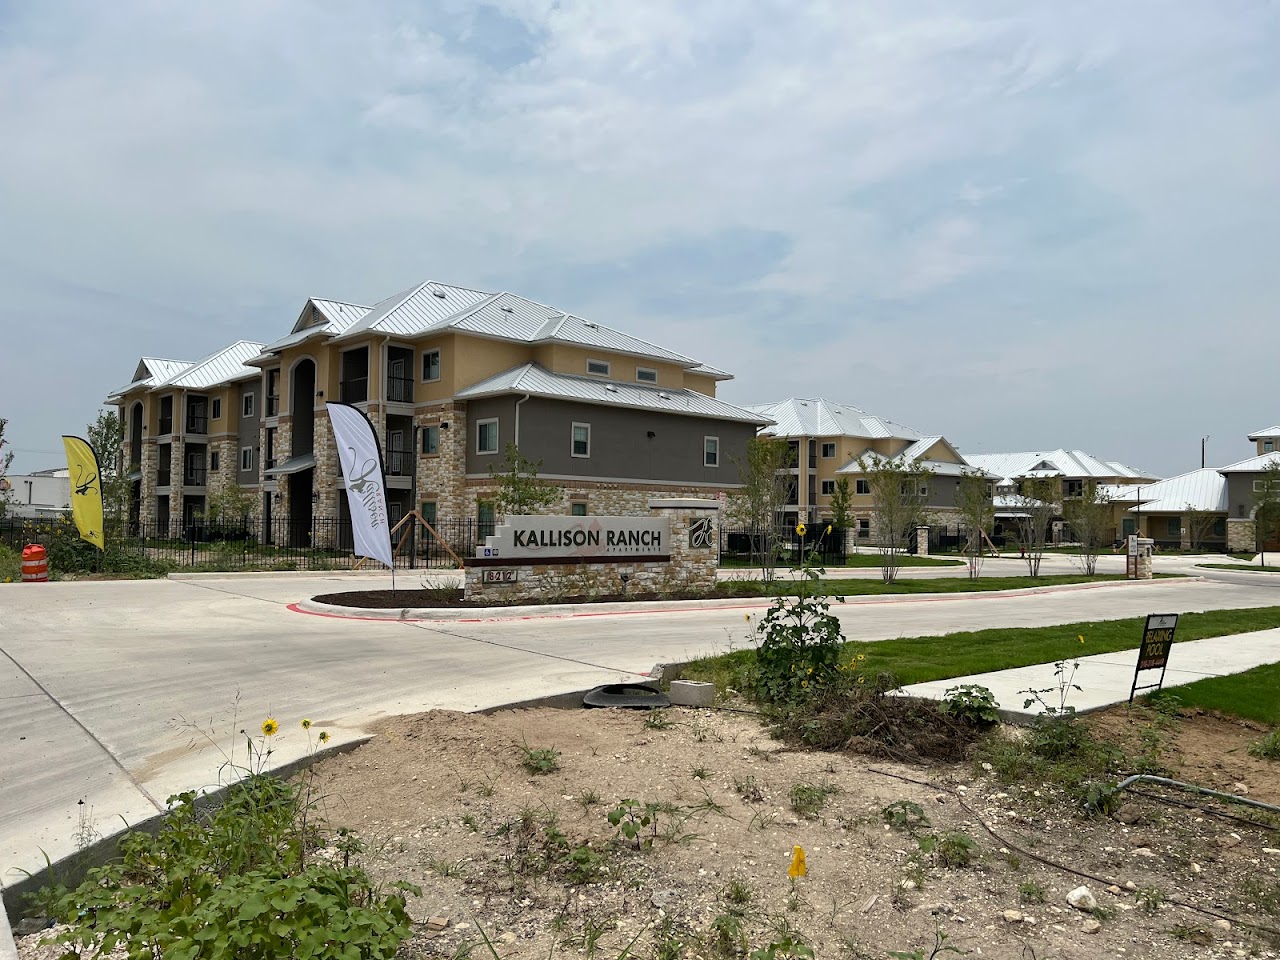 Photo of KALLISON RANCH. Affordable housing located at 8212 TALLEY ROAD SAN ANTONIO, TX 78254